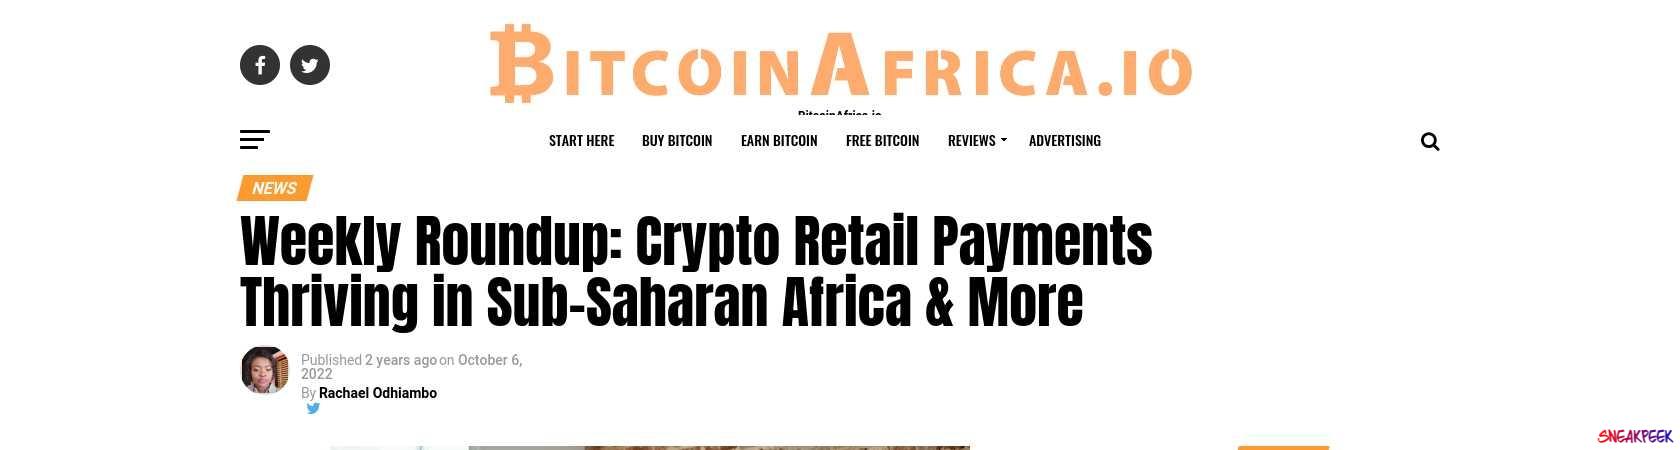 Read the full Article:  ⭲ Weekly Roundup: Crypto Retail Payments Thriving in Sub-Saharan Africa & More